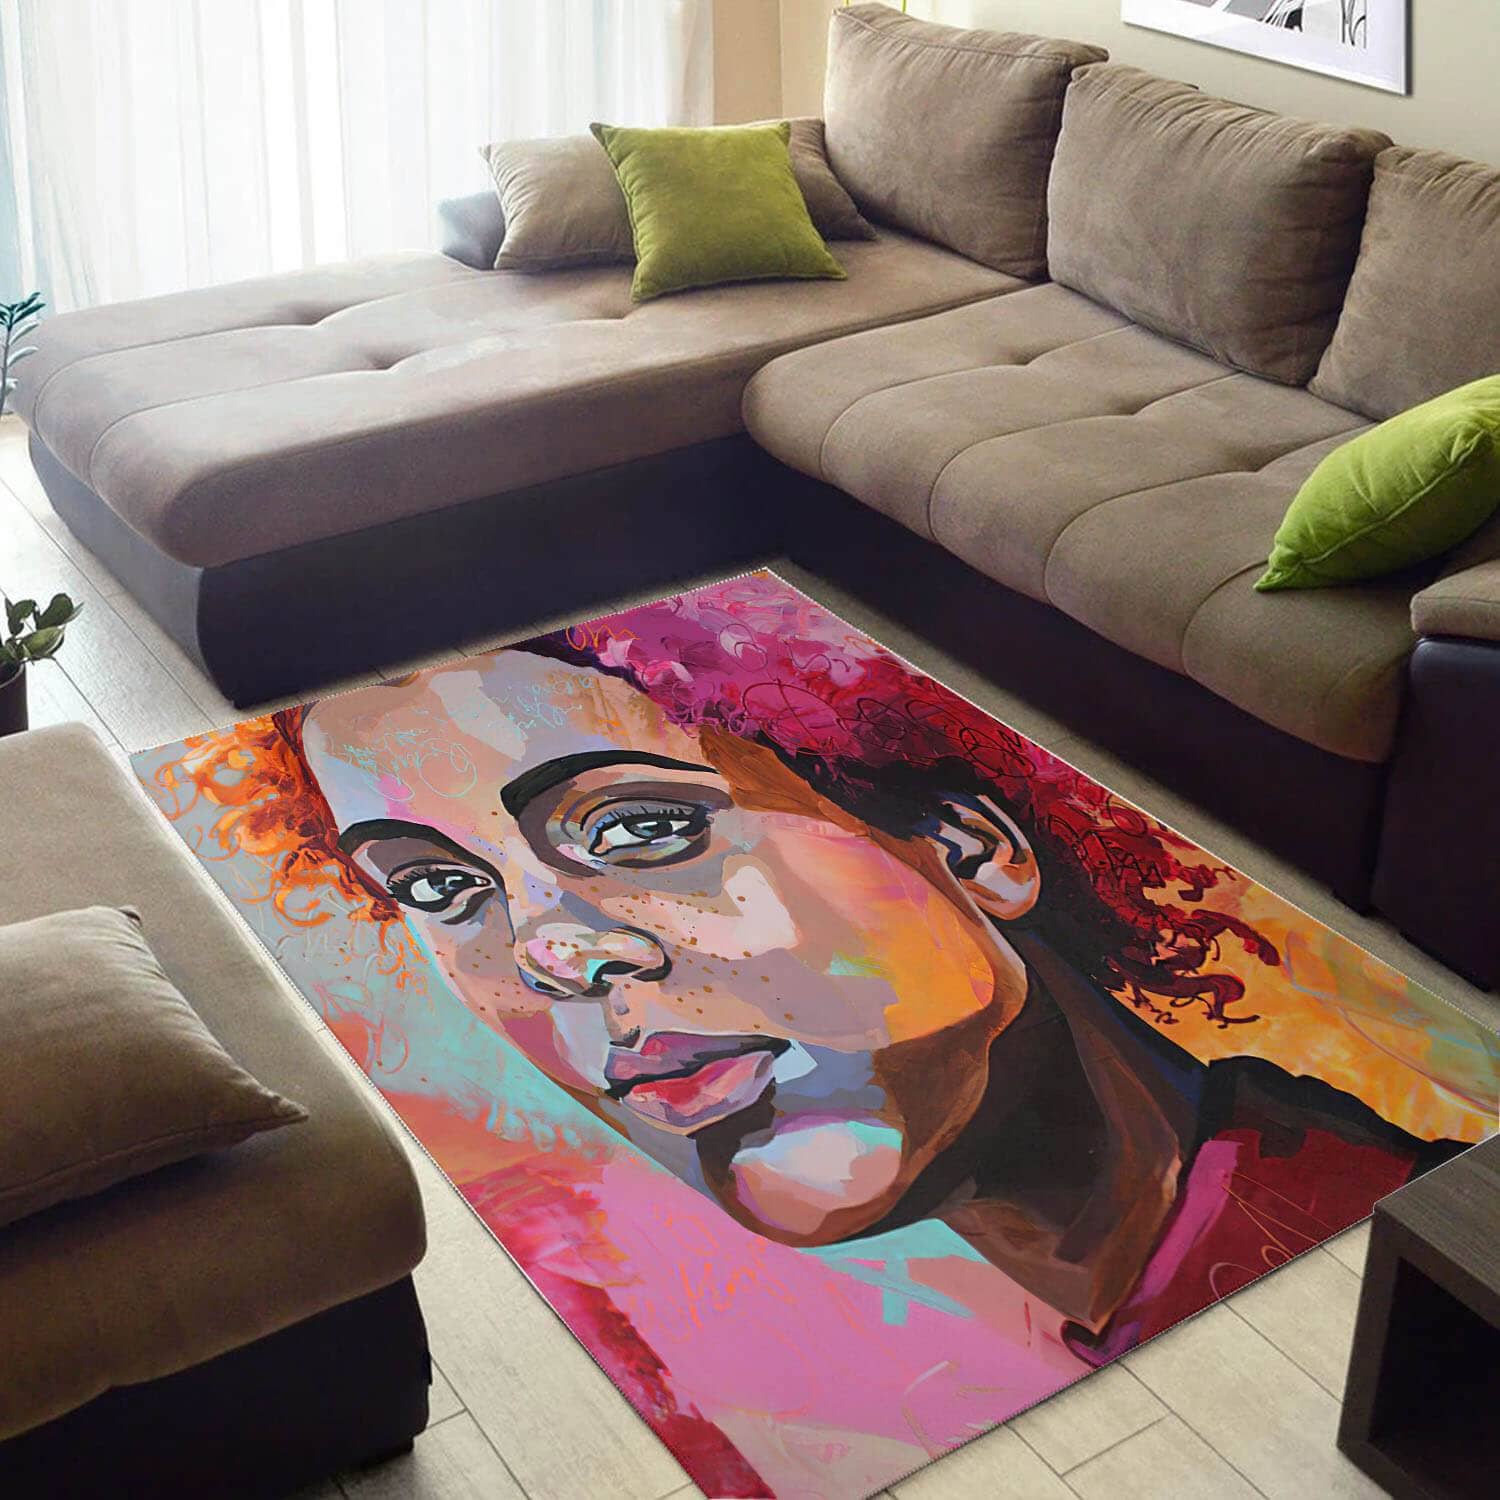 Inspired African Cute Themed Afro Woman Design Floor Living Room Rug